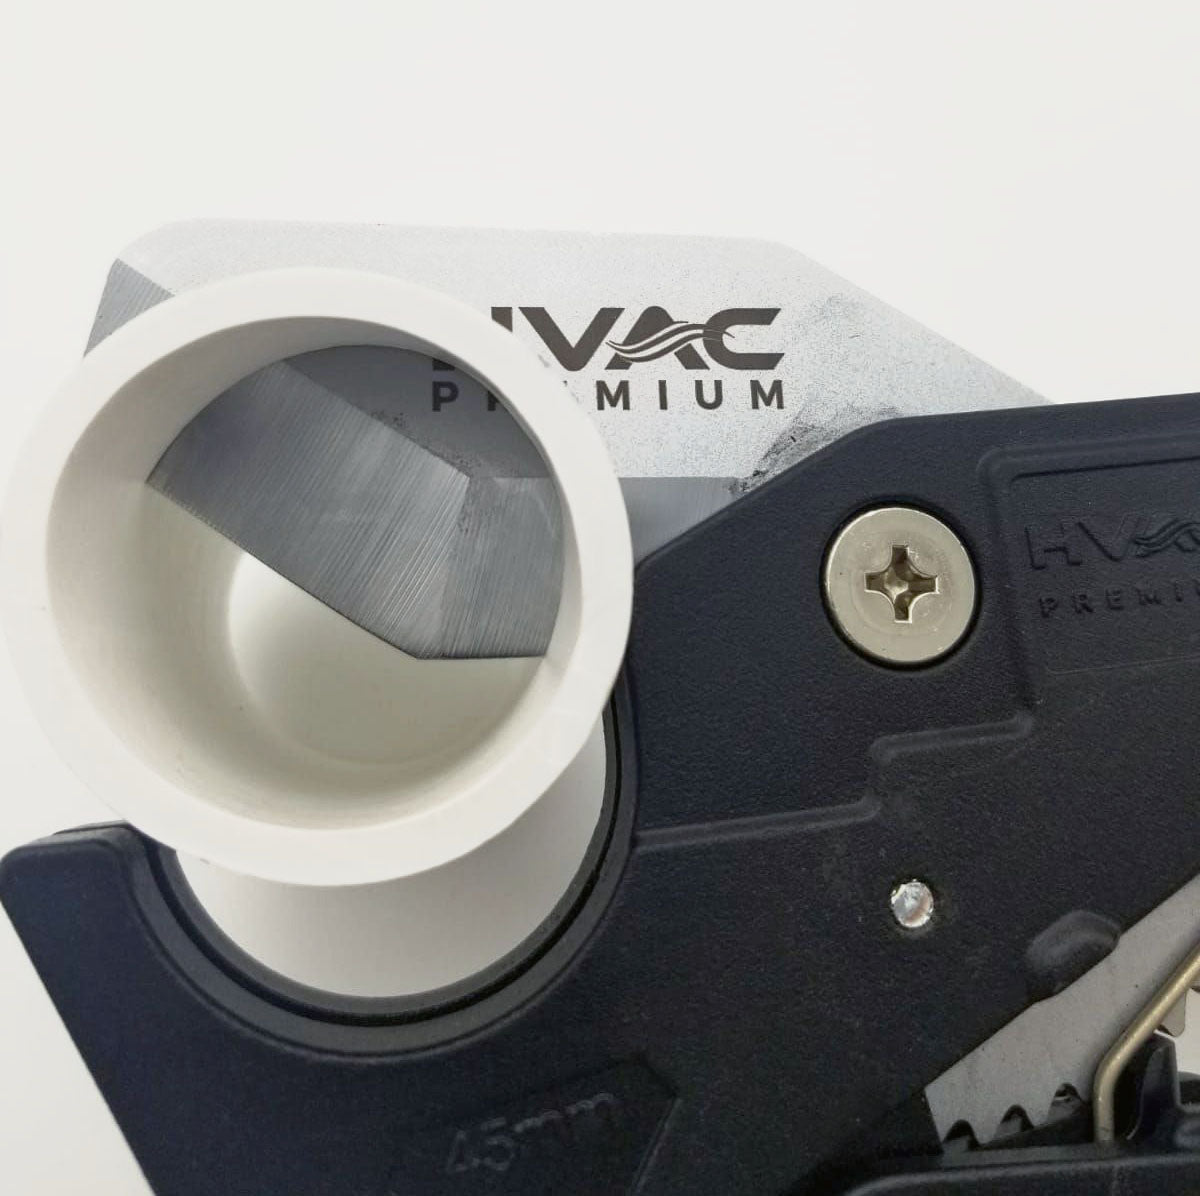 HVAC Premium Heavy Duty Automatic PVC Pipe Cutter 36mm For Cutting Thin/Thick PVC 36mm &amp; Below &quot;